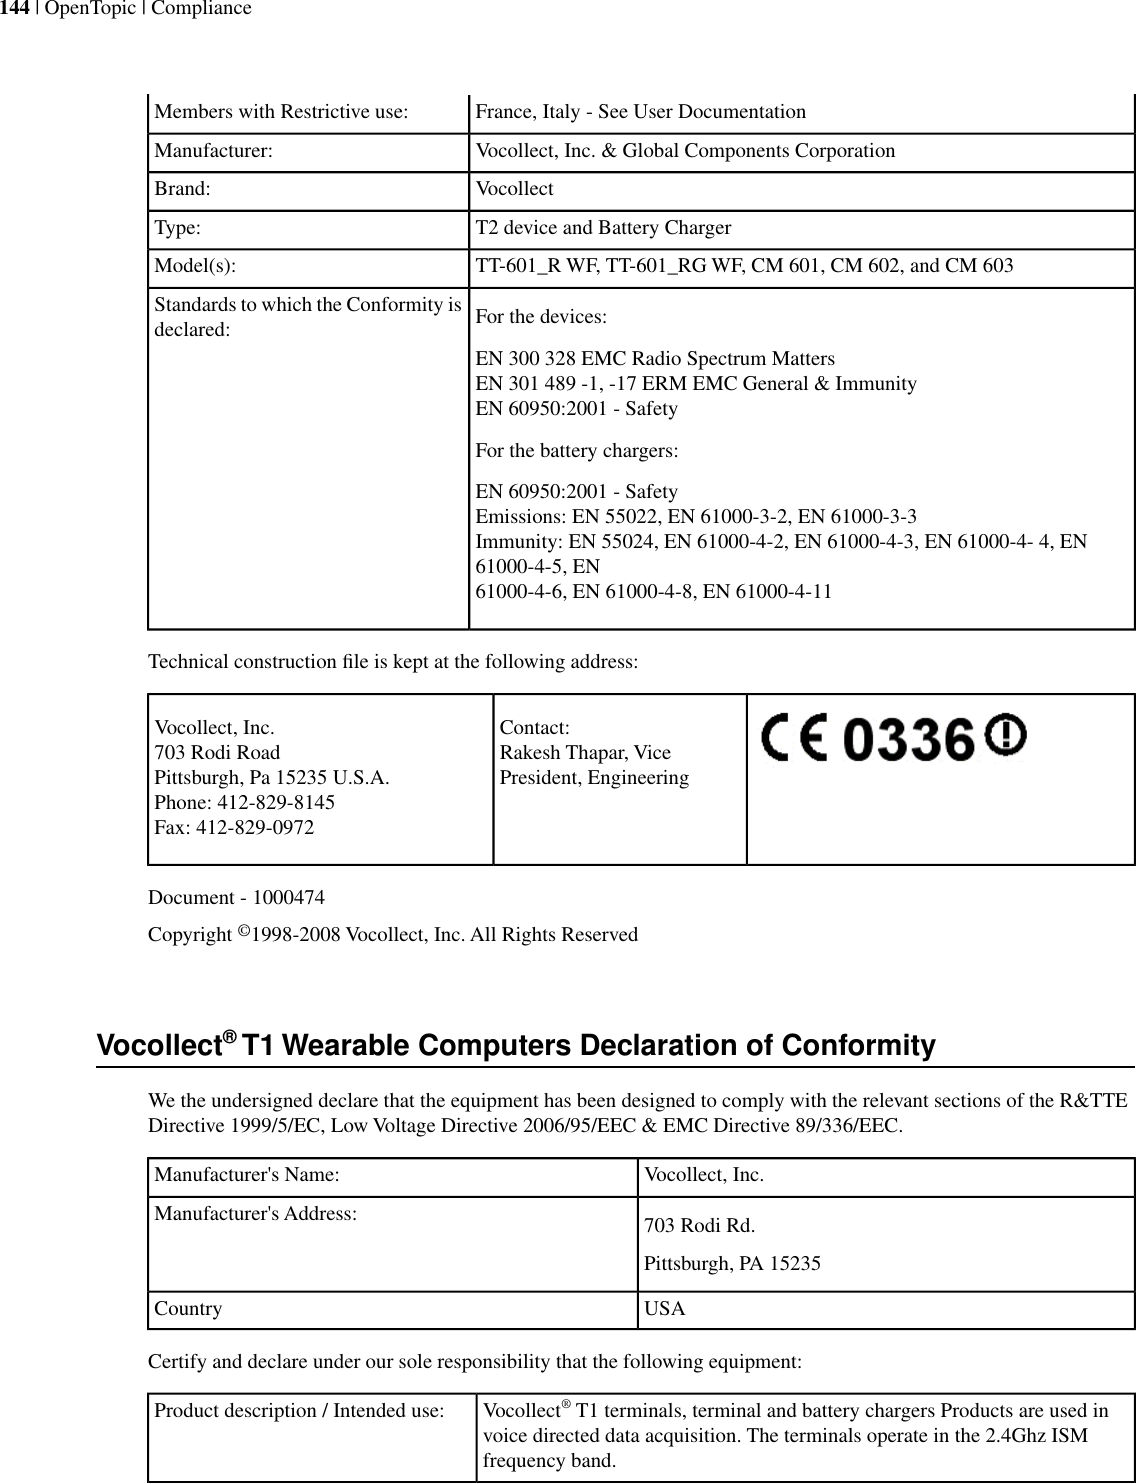 France, Italy - See User DocumentationMembers with Restrictive use:Vocollect, Inc. &amp; Global Components CorporationManufacturer:VocollectBrand:T2 device and Battery ChargerType:TT-601_R WF, TT-601_RG WF, CM 601, CM 602, and CM 603Model(s):For the devices:Standards to which the Conformity isdeclared:EN 300 328 EMC Radio Spectrum MattersEN 301 489 -1, -17 ERM EMC General &amp; ImmunityEN 60950:2001 - SafetyFor the battery chargers:EN 60950:2001 - SafetyEmissions: EN 55022, EN 61000-3-2, EN 61000-3-3Immunity: EN 55024, EN 61000-4-2, EN 61000-4-3, EN 61000-4- 4, EN61000-4-5, EN61000-4-6, EN 61000-4-8, EN 61000-4-11Technical construction ﬁle is kept at the following address:Contact:Rakesh Thapar, VicePresident, EngineeringVocollect, Inc.703 Rodi RoadPittsburgh, Pa 15235 U.S.A.Phone: 412-829-8145Fax: 412-829-0972Document - 1000474Copyright ©1998-2008 Vocollect, Inc. All Rights ReservedVocollect®T1 Wearable Computers Declaration of ConformityWe the undersigned declare that the equipment has been designed to comply with the relevant sections of the R&amp;TTEDirective 1999/5/EC, Low Voltage Directive 2006/95/EEC &amp; EMC Directive 89/336/EEC.Vocollect, Inc.Manufacturer&apos;s Name:703 Rodi Rd.Manufacturer&apos;s Address:Pittsburgh, PA 15235USACountryCertify and declare under our sole responsibility that the following equipment:Vocollect®T1 terminals, terminal and battery chargers Products are used invoice directed data acquisition. The terminals operate in the 2.4Ghz ISMfrequency band.Product description / Intended use:144 | OpenTopic | Compliance